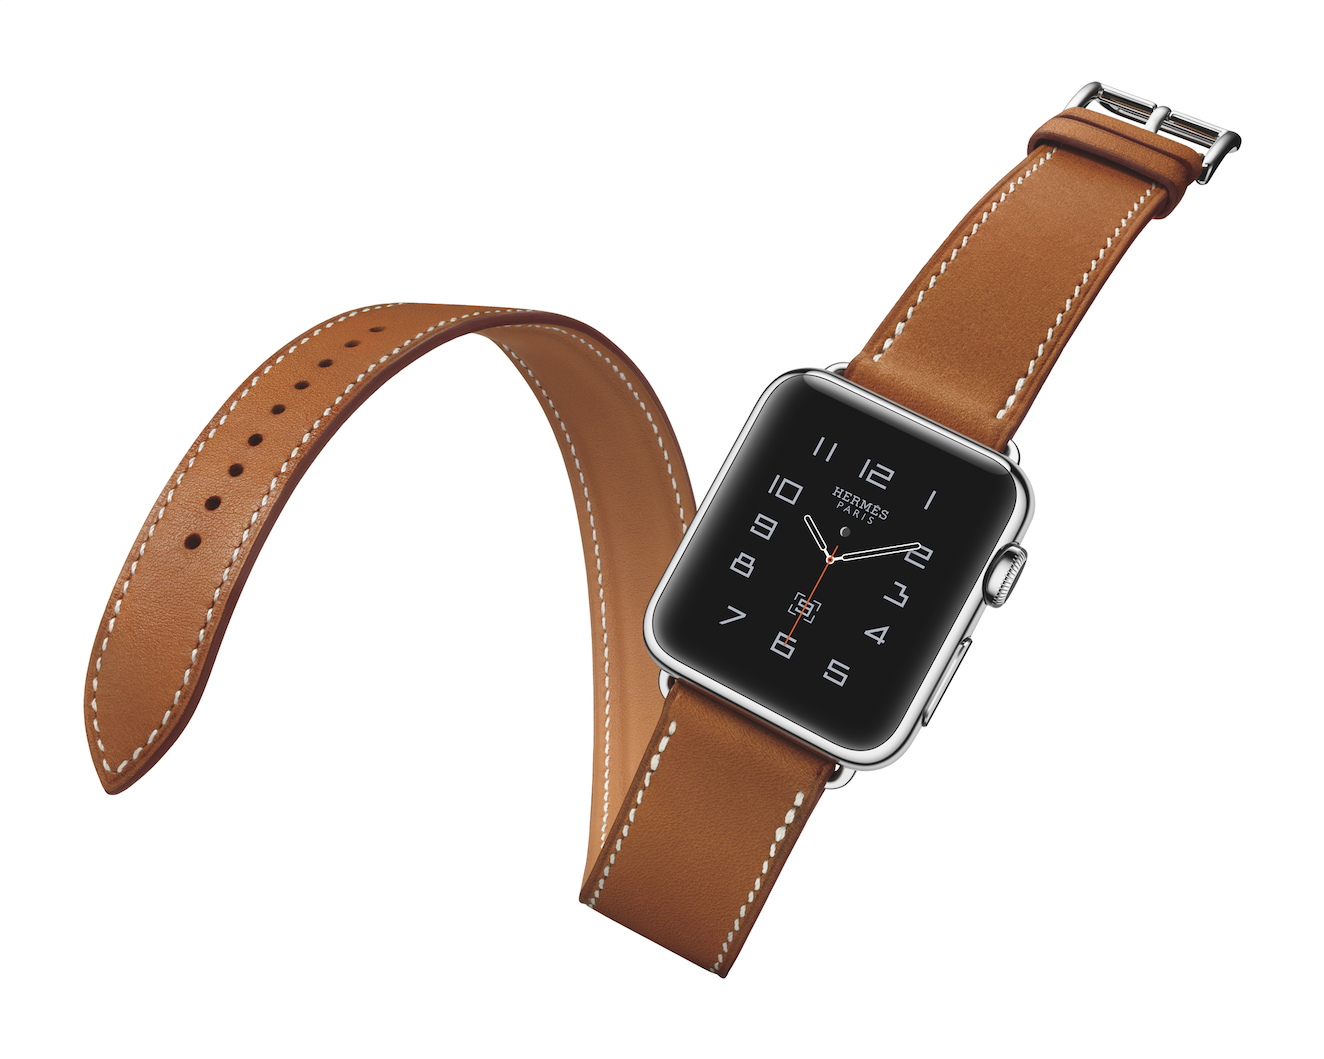 EXCLUSIVE: INTRODUCING THE APPLE WATCH HERMÈS COLLECTION